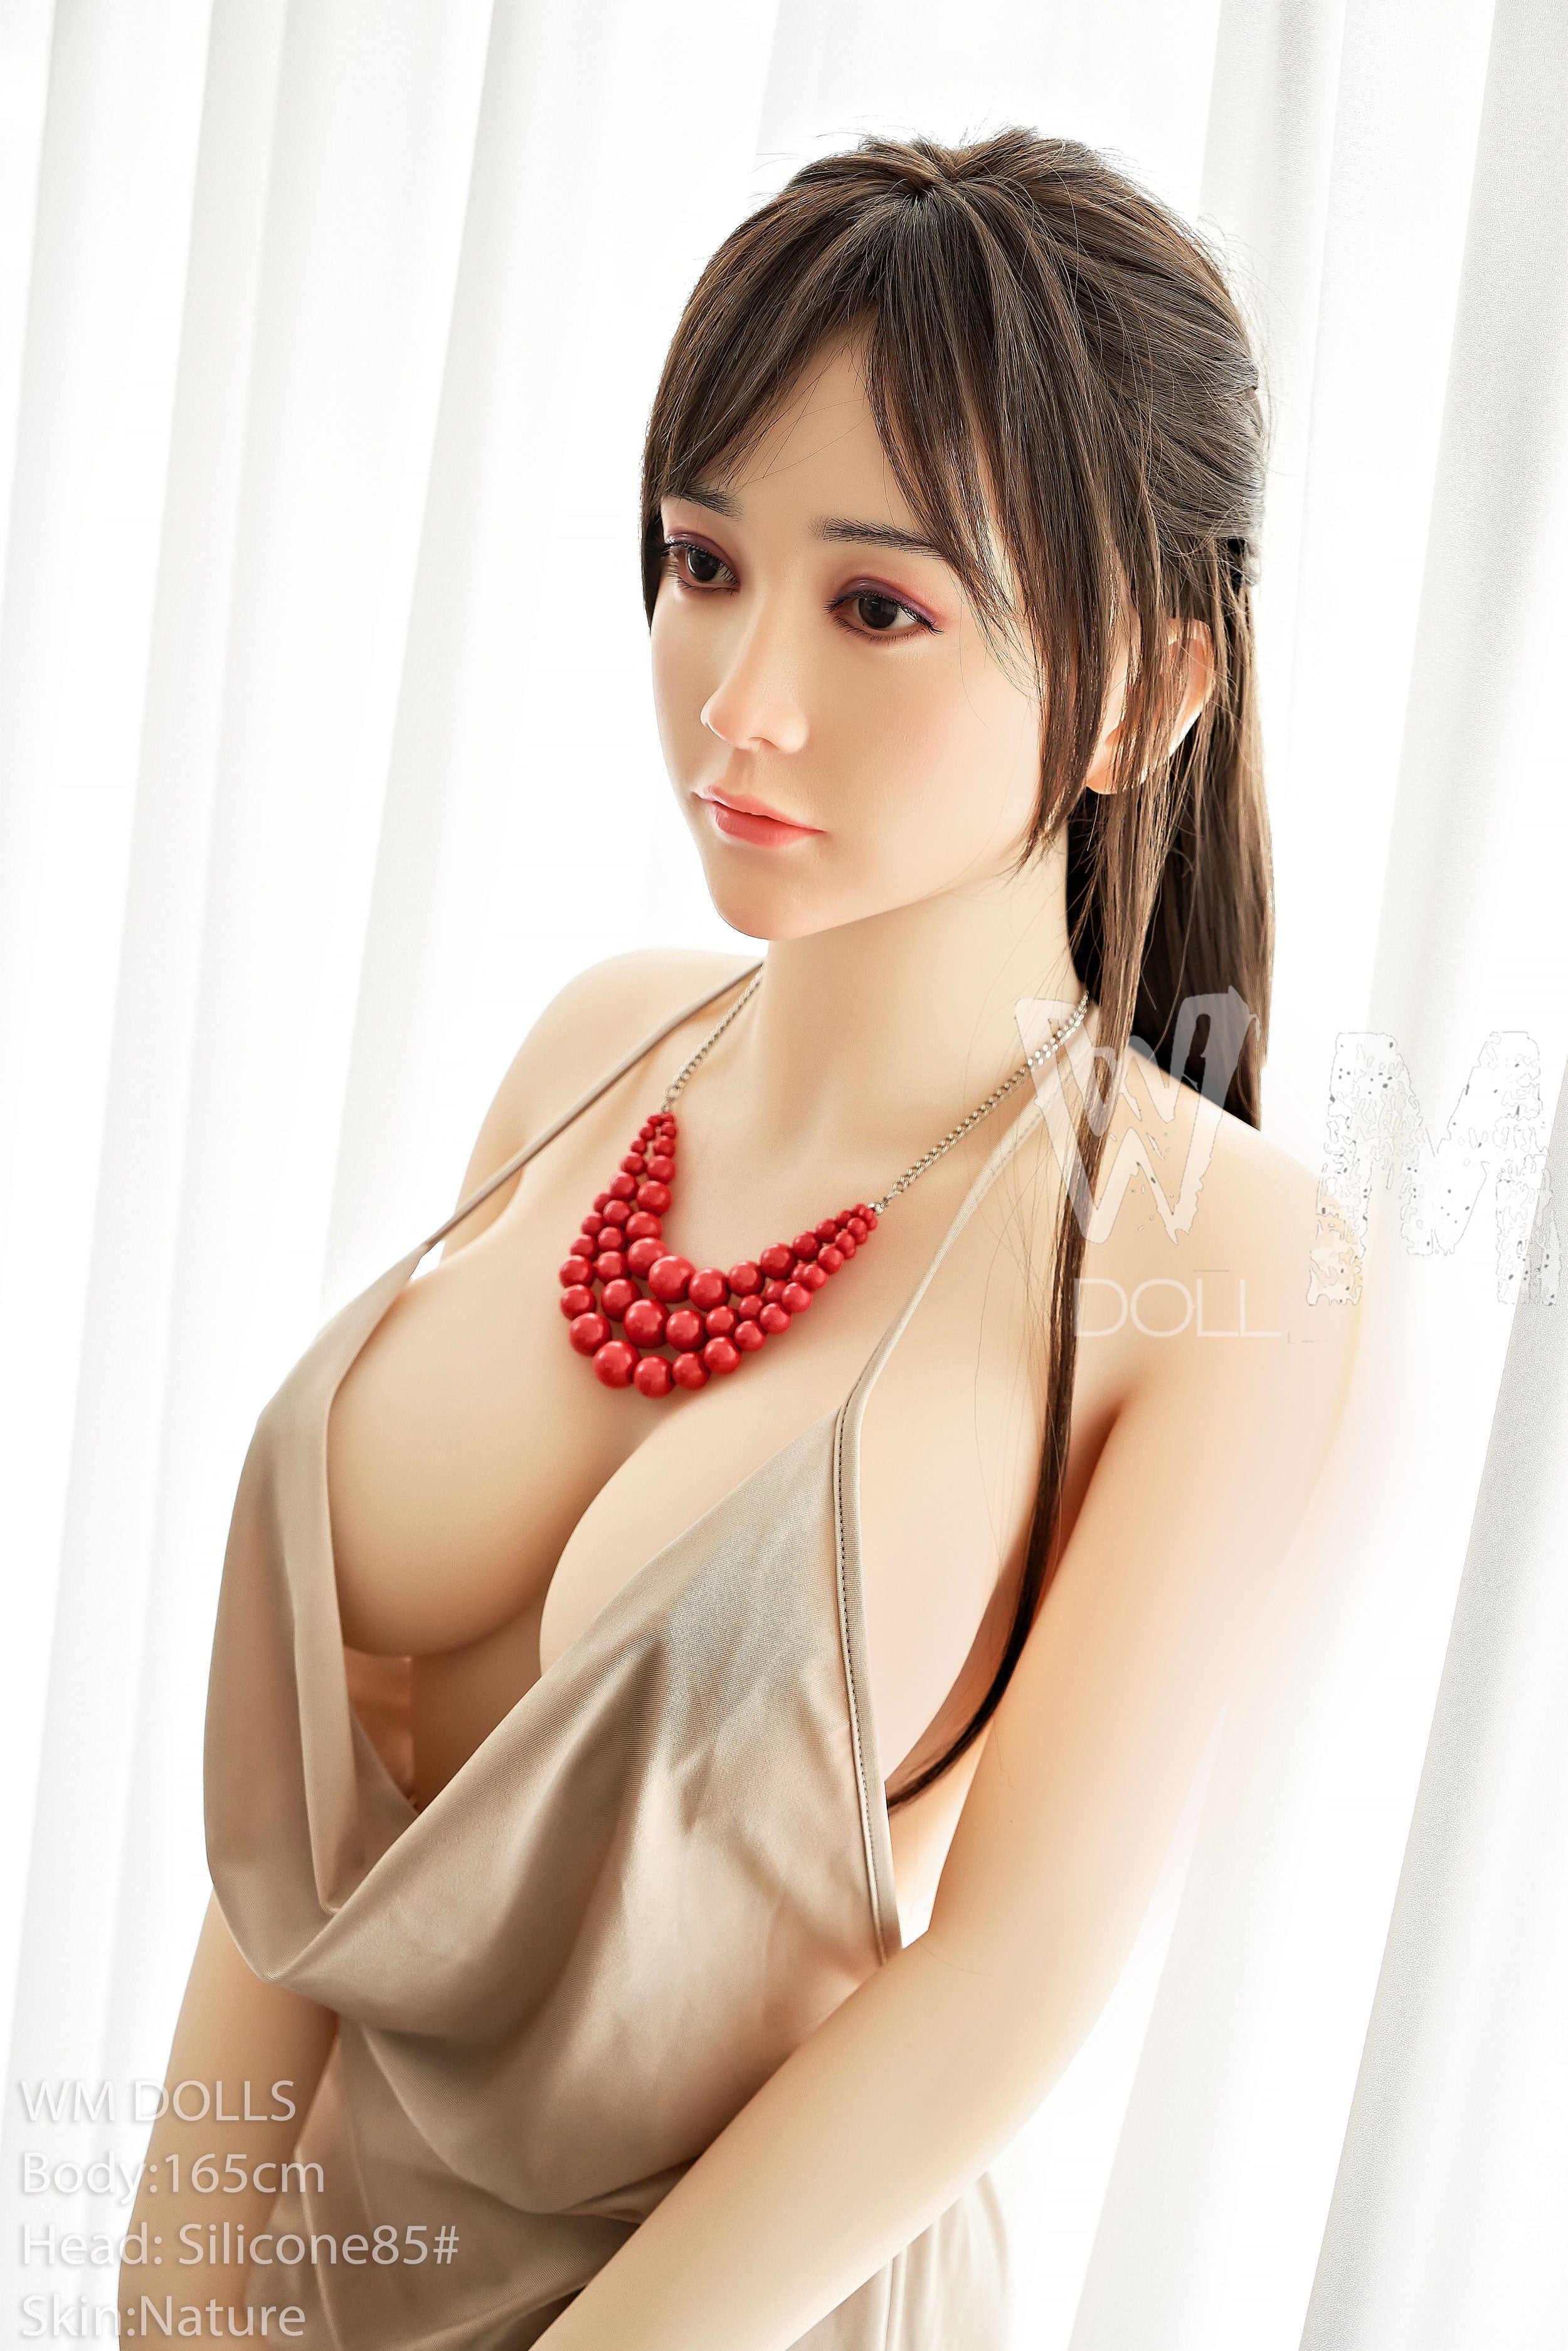 WM Doll 165 cm D Silicone - Alina | Buy Sex Dolls at DOLLS ACTUALLY